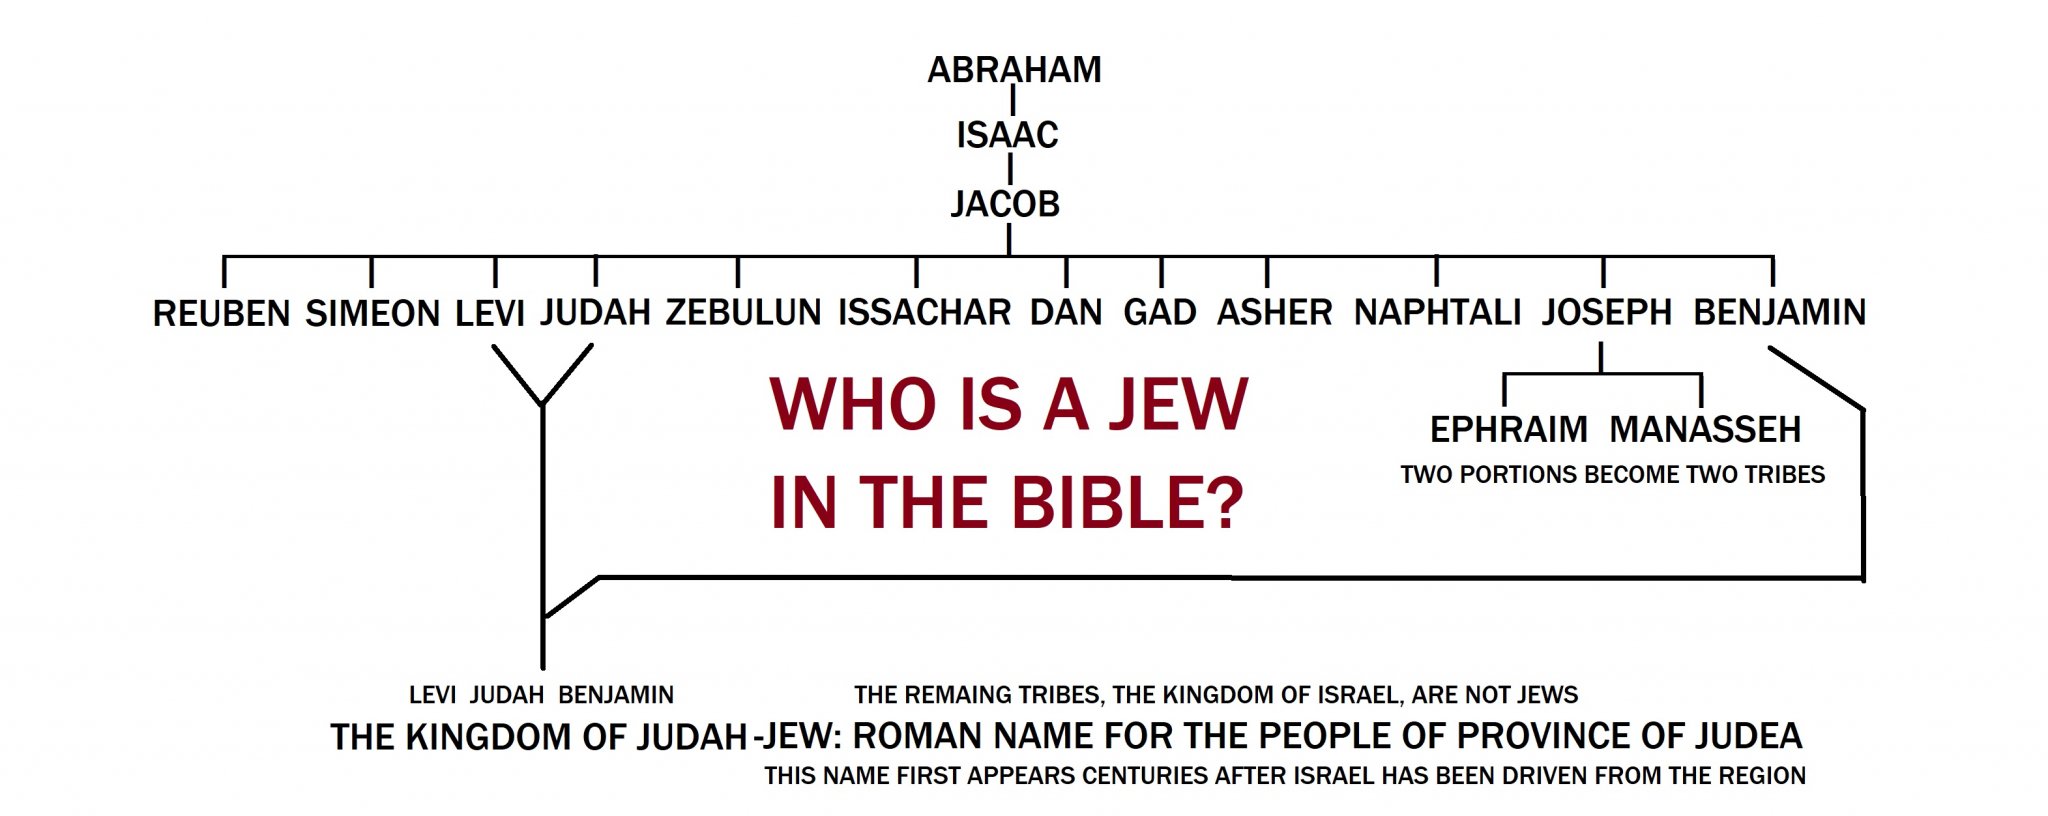 Who Is A Jew In The Bible.jpg